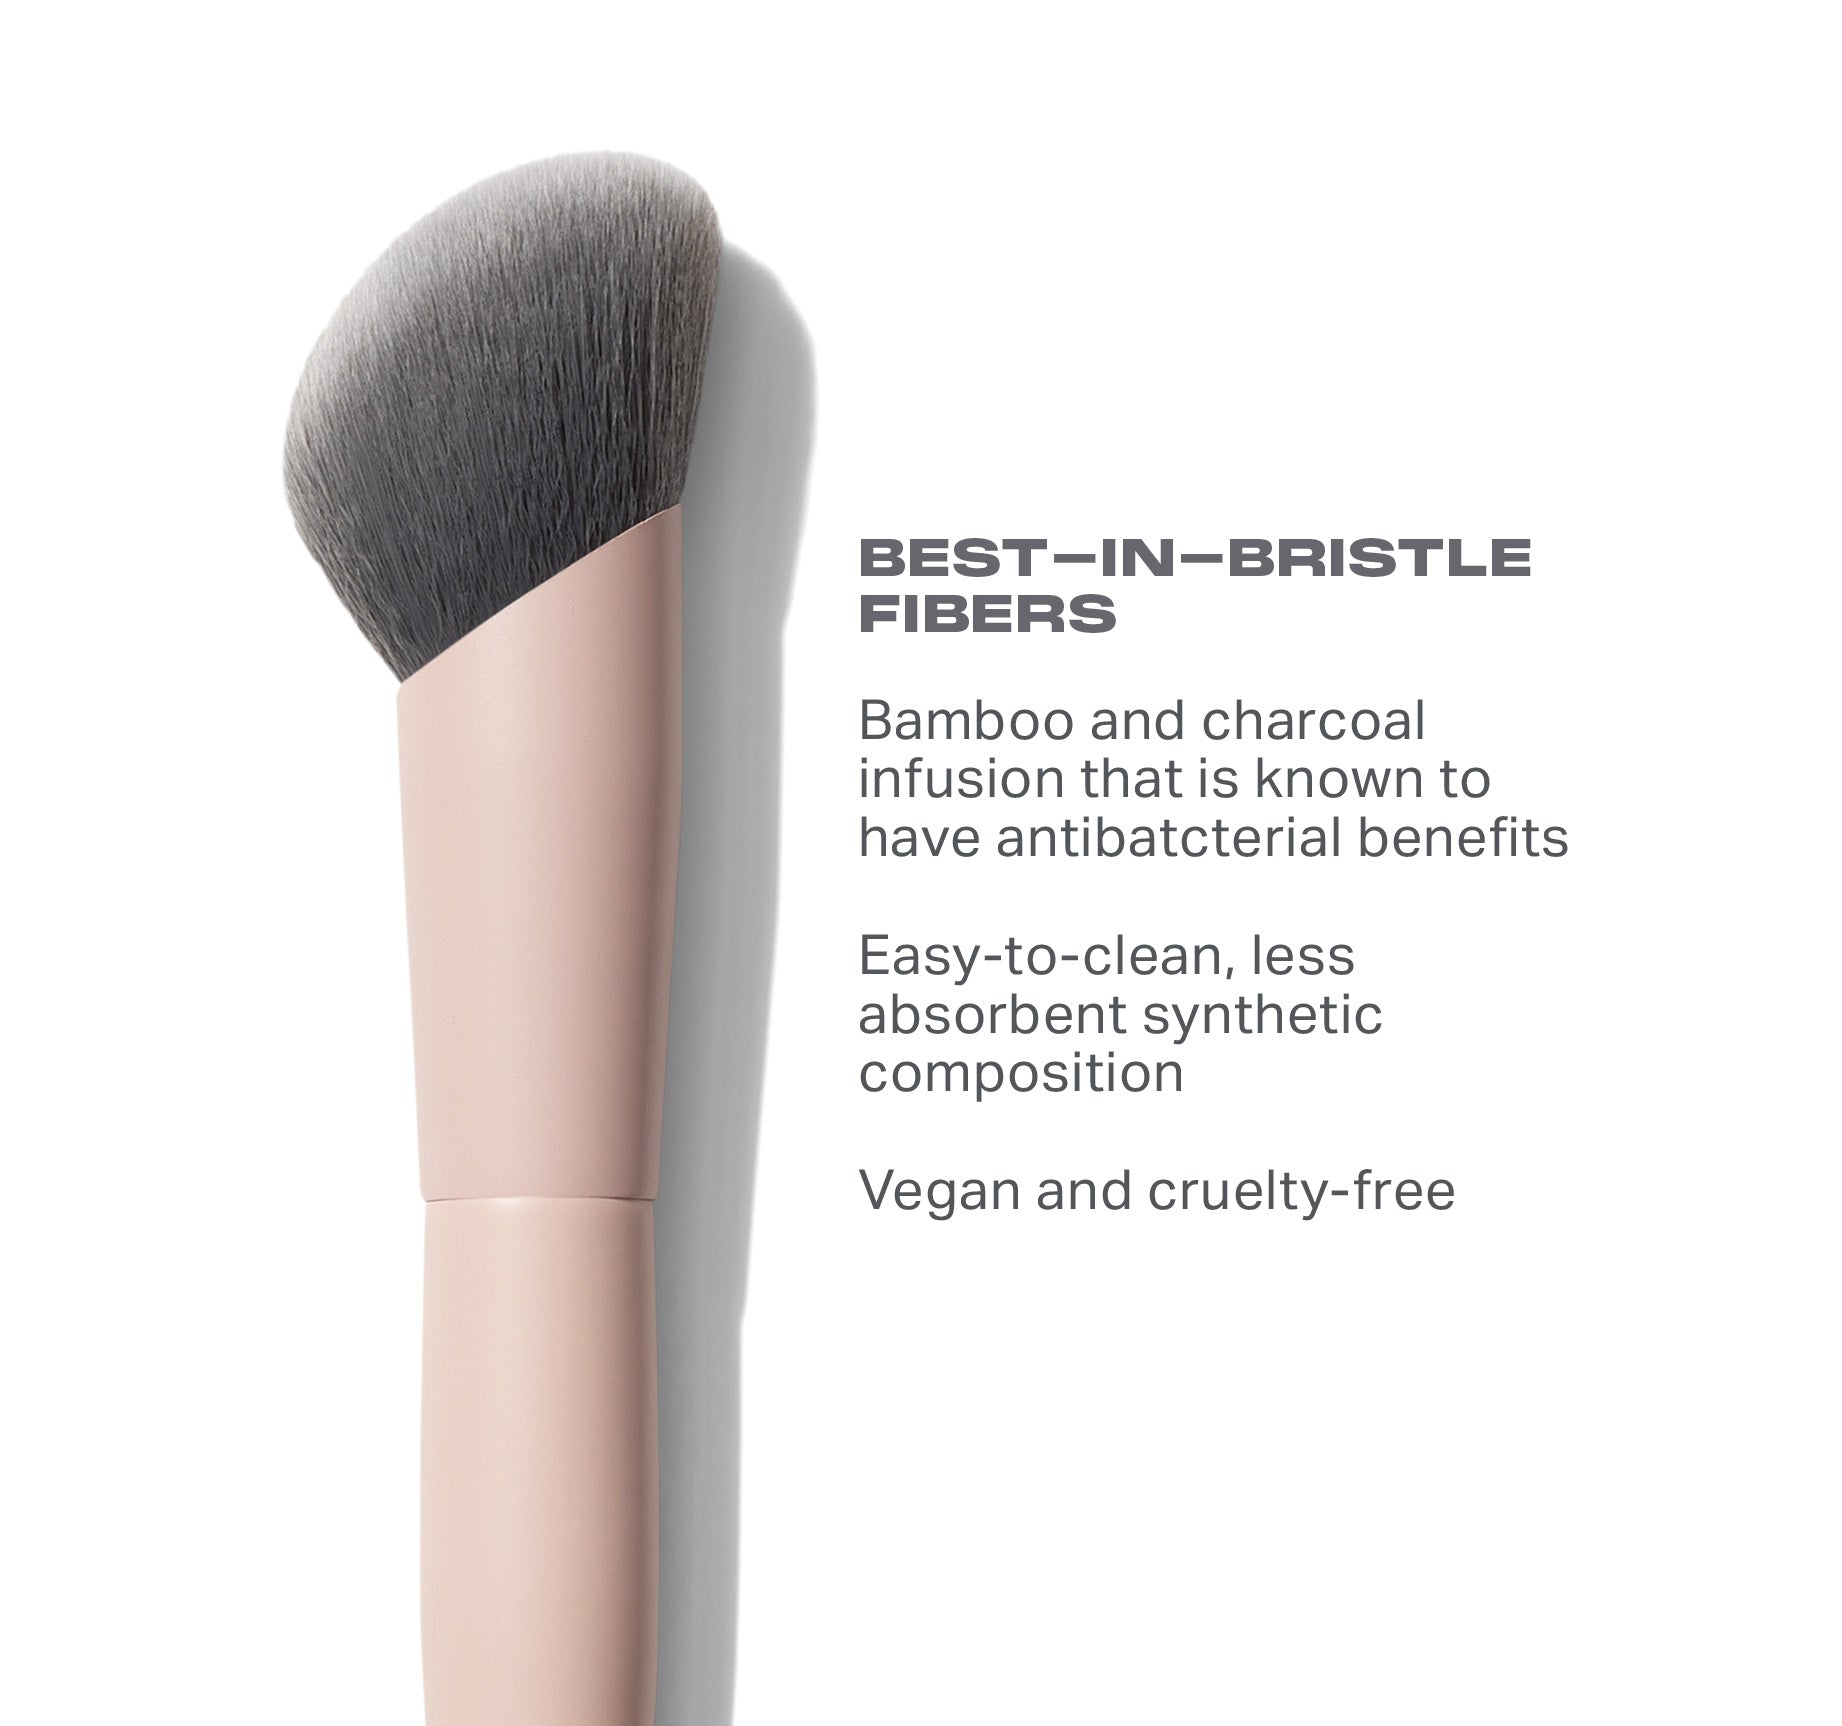 Travel Shaping Essentials Bamboo & Charcoal Infused Travel Brush Set - Image 3